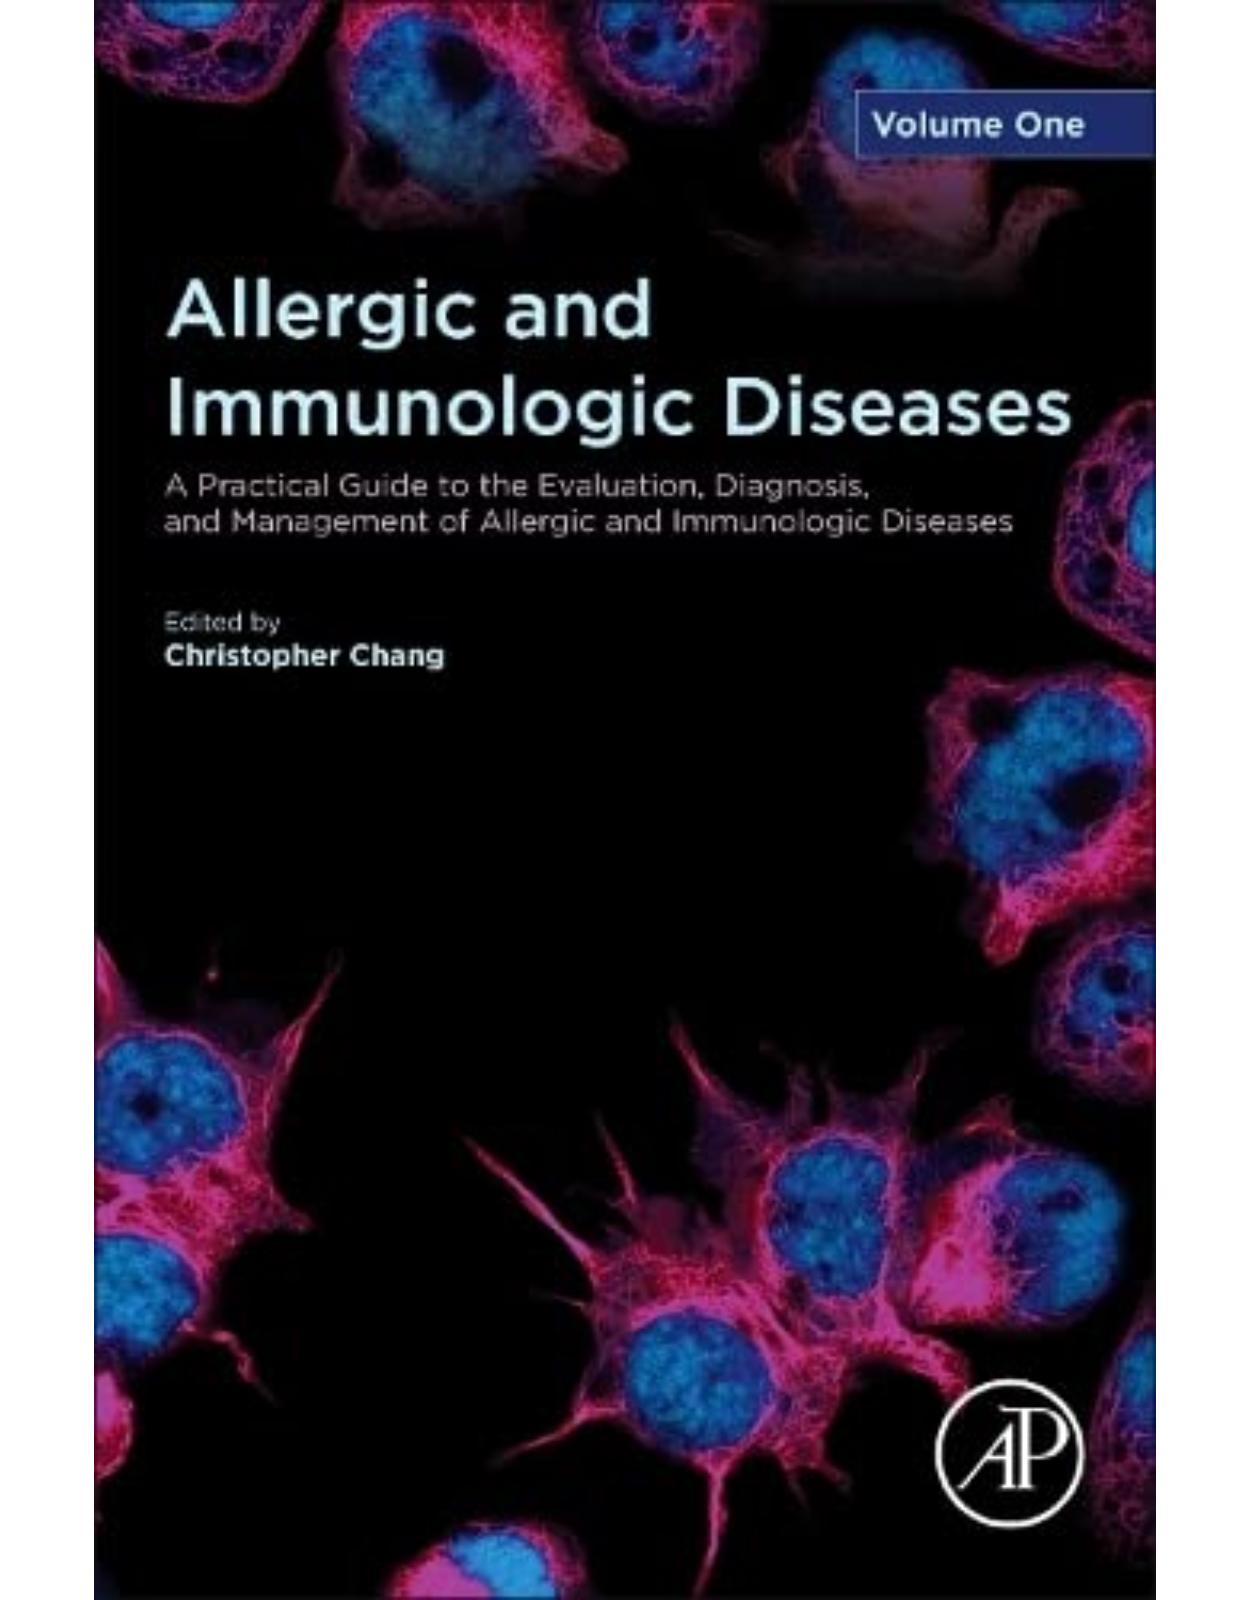 Allergic and Immunologic Diseases: A Practical Guide to the Evaluation, Diagnosis and Management of Allergic and Immunologic Diseases 